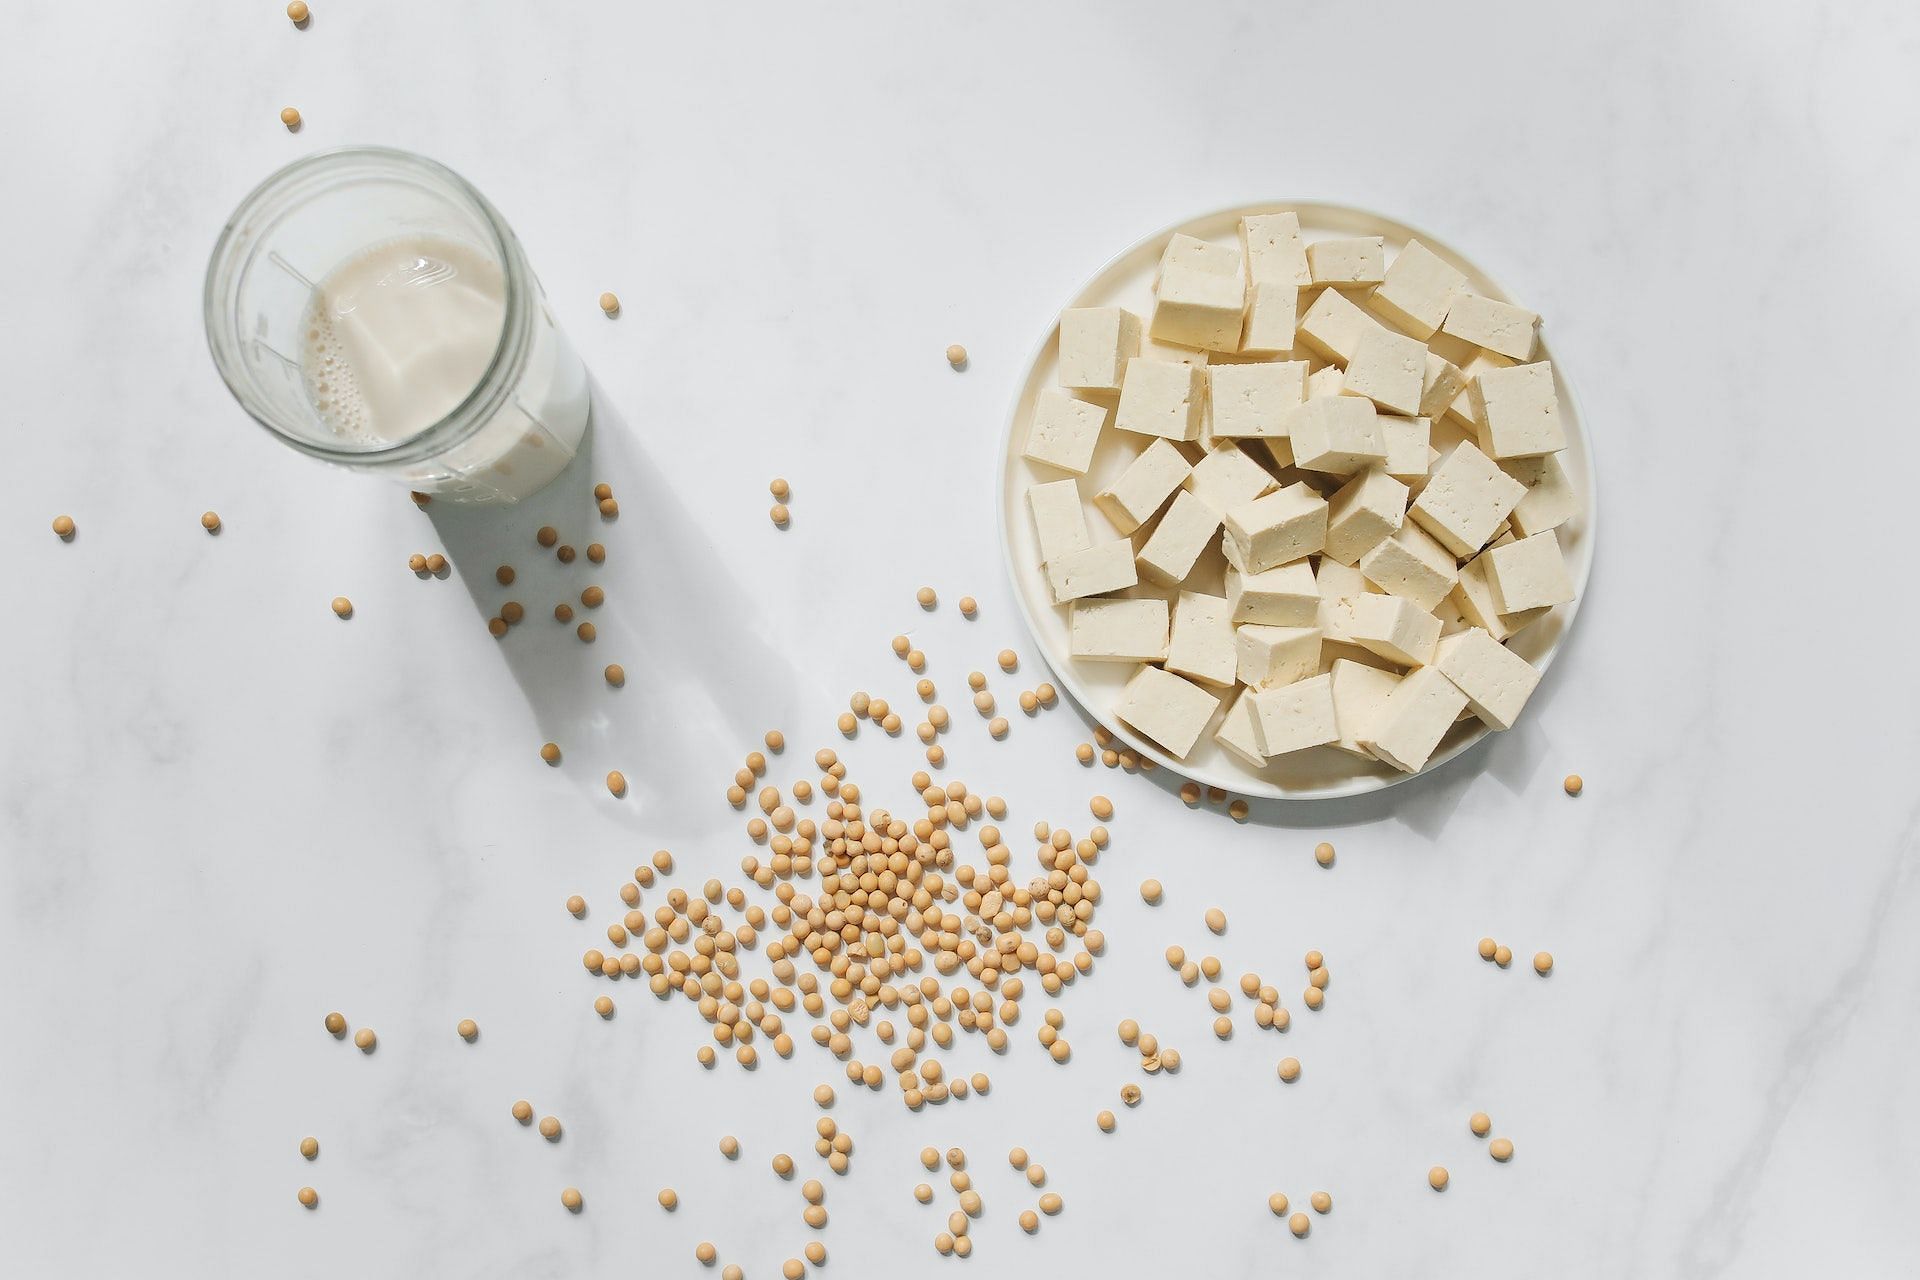 Soy milk and tofu must be avoided in hypothyroidism. (Photo via Pexels/Polina Tankilevitch)